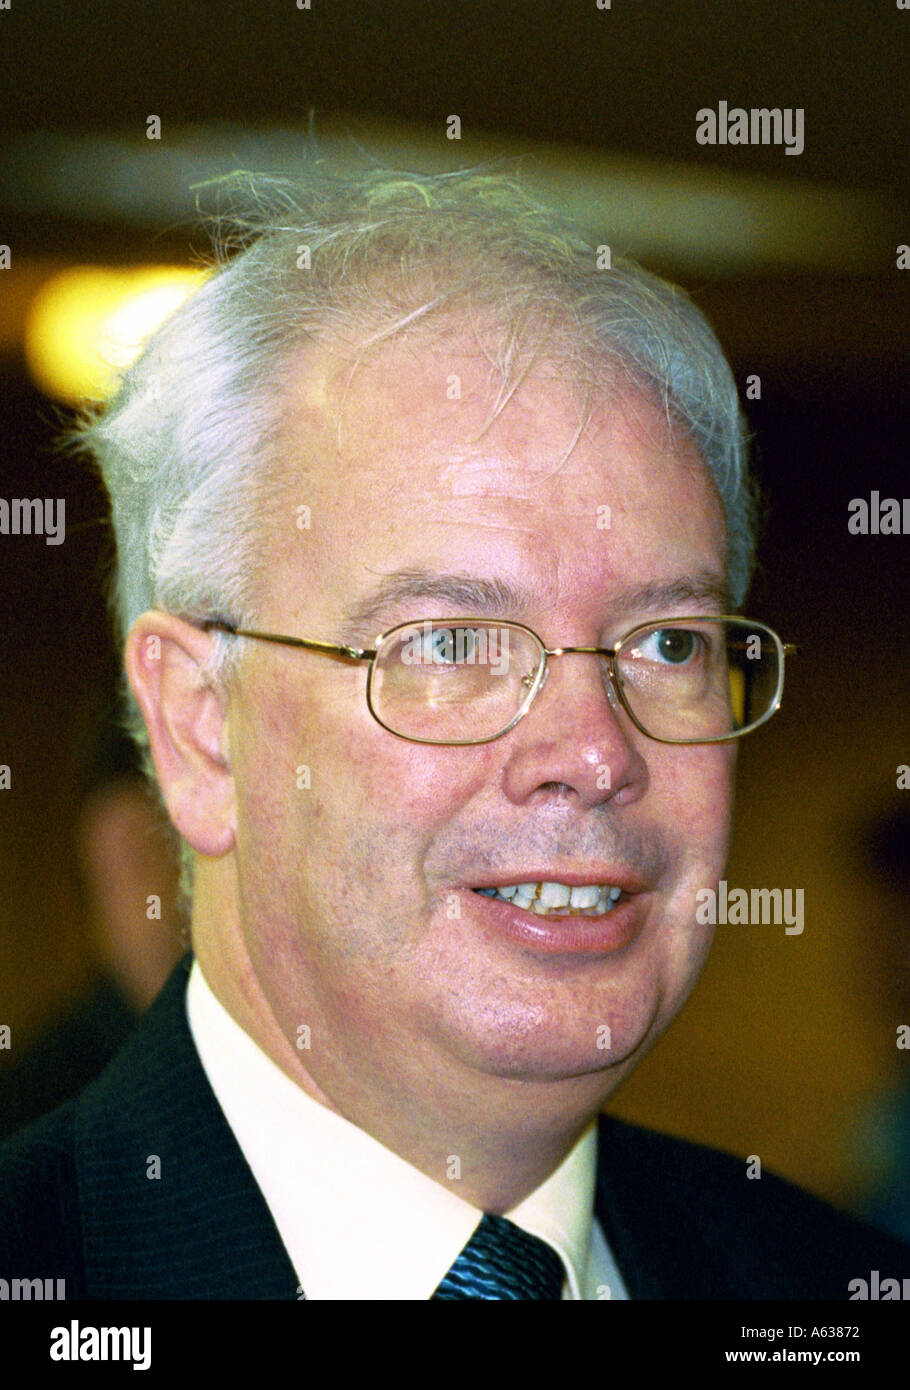 Jim Wallace Liberal Democrat MP for Orkney and Shetland Stock Photo